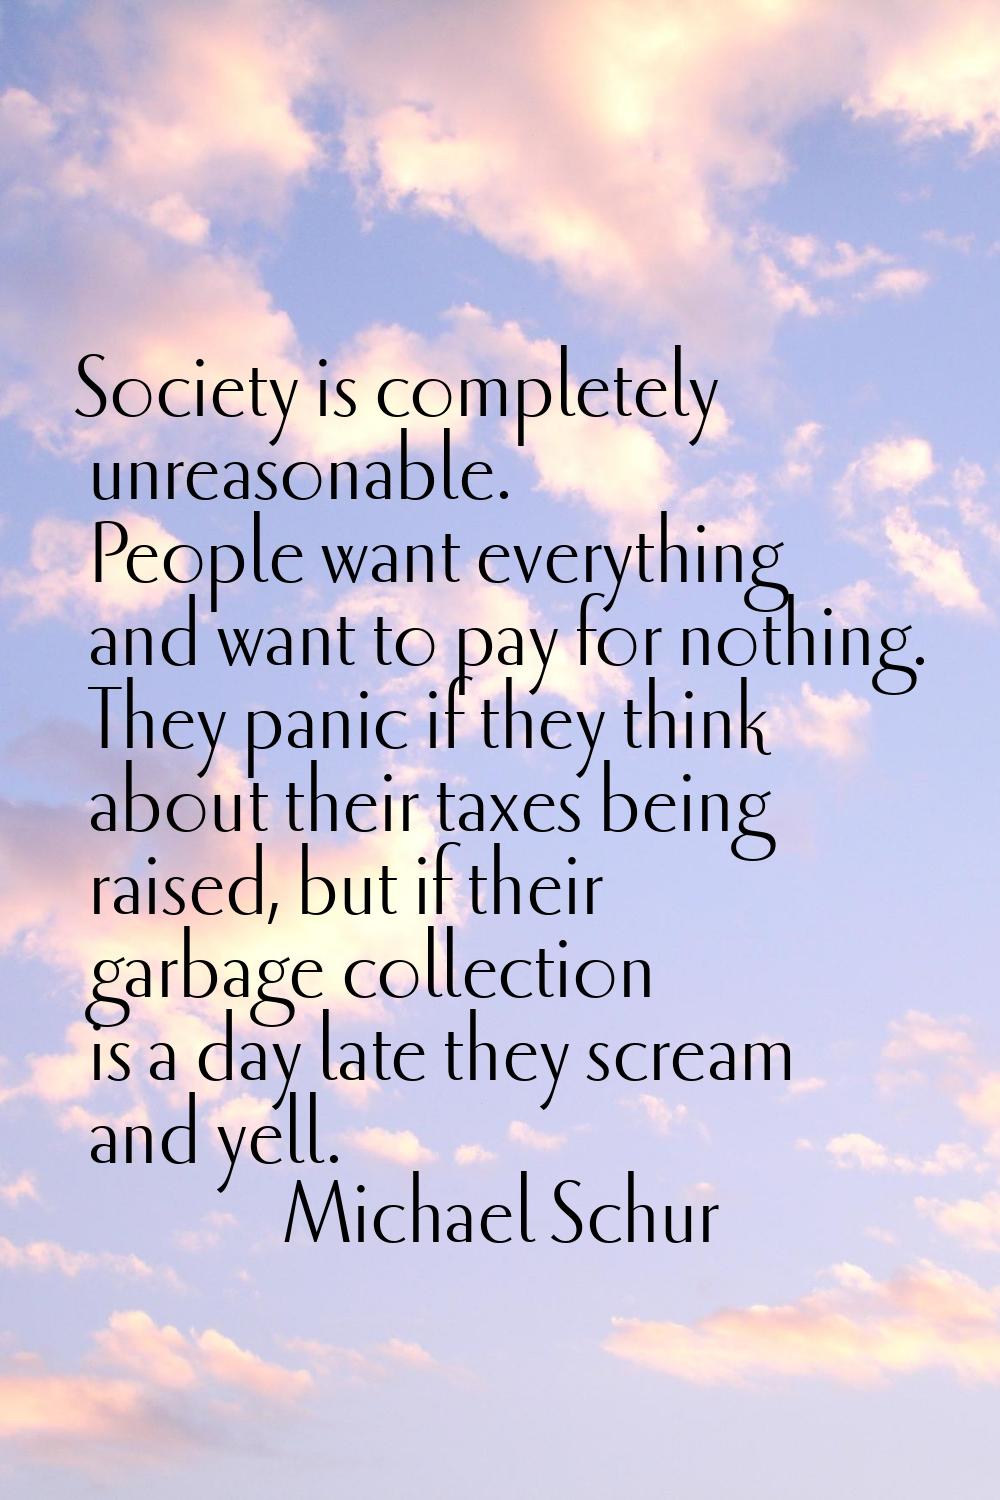 Society is completely unreasonable. People want everything and want to pay for nothing. They panic 